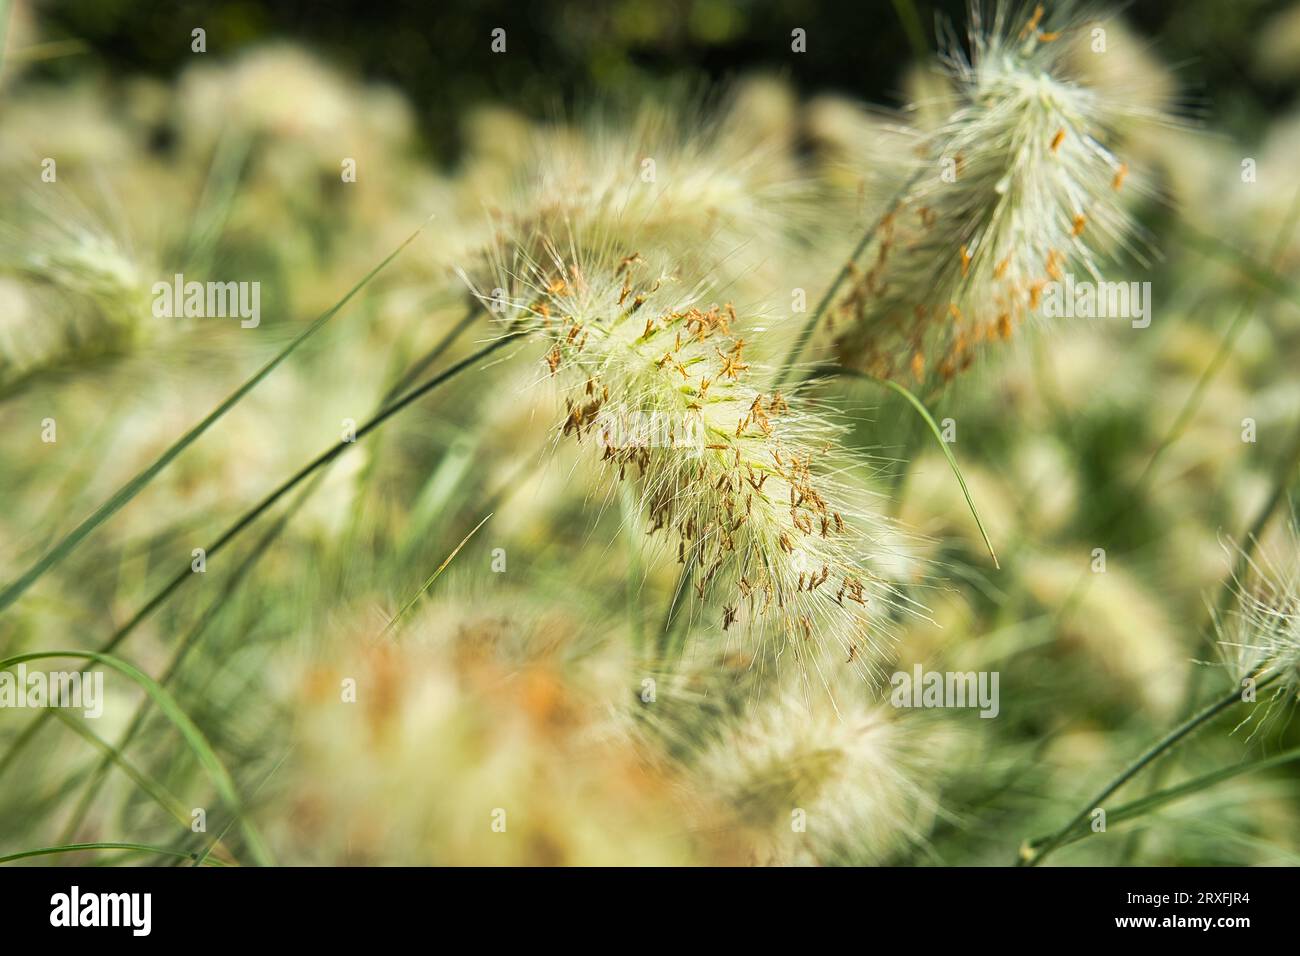 Jardine d'acclimatation, France, Pennisetum villosum is a species of flowering plant in the grass family Poaceae,  common name feathertop grass Stock Photo